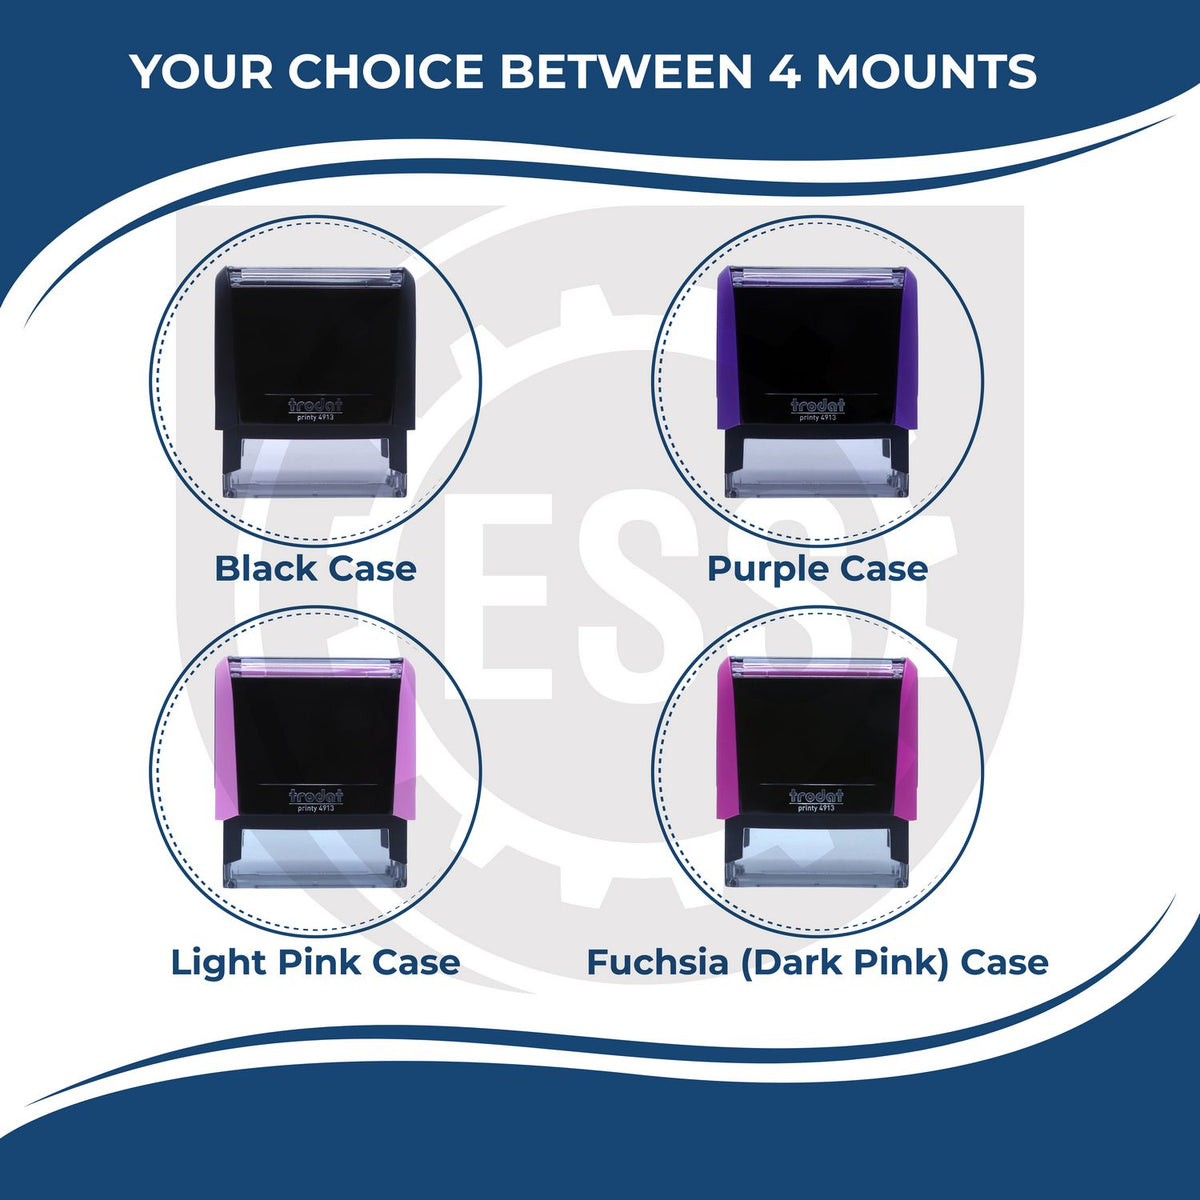 A picture of different colored mounts for the Self-Inking Rectangular Pennsylvania Notary Stamp featurning a Red, Blue or Black Mount